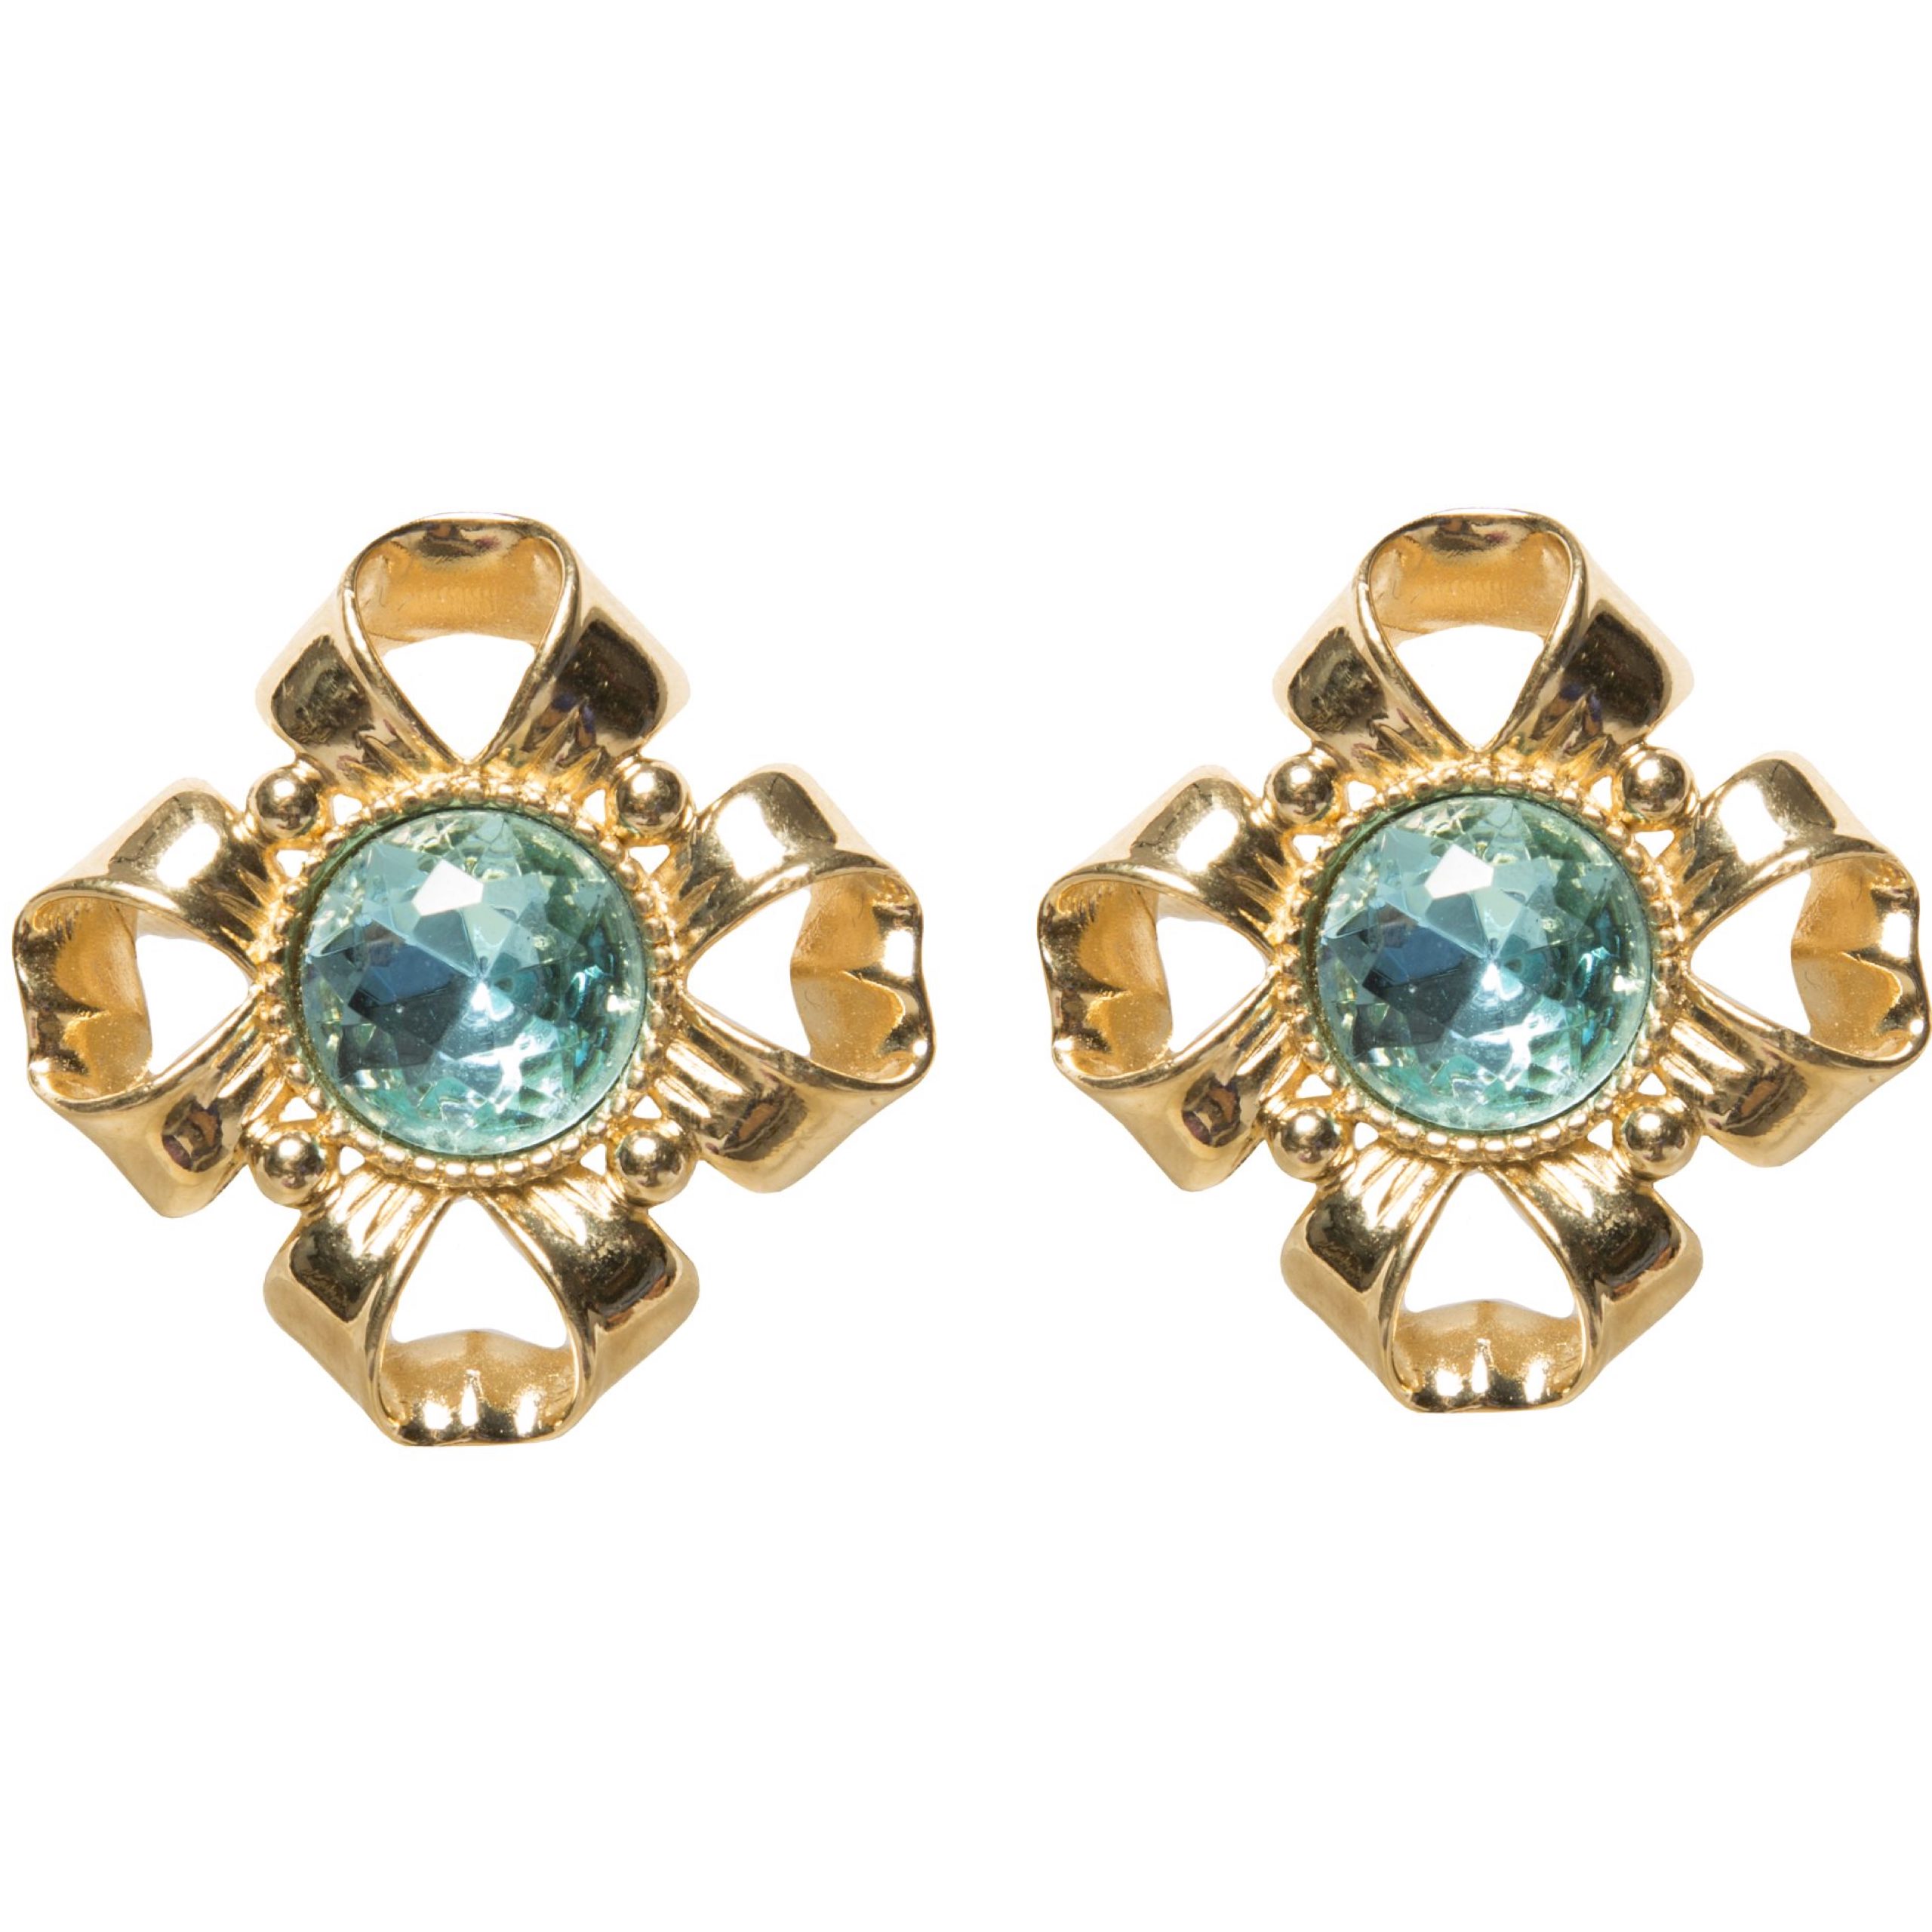 Vintage gold flower earrings with blue stone